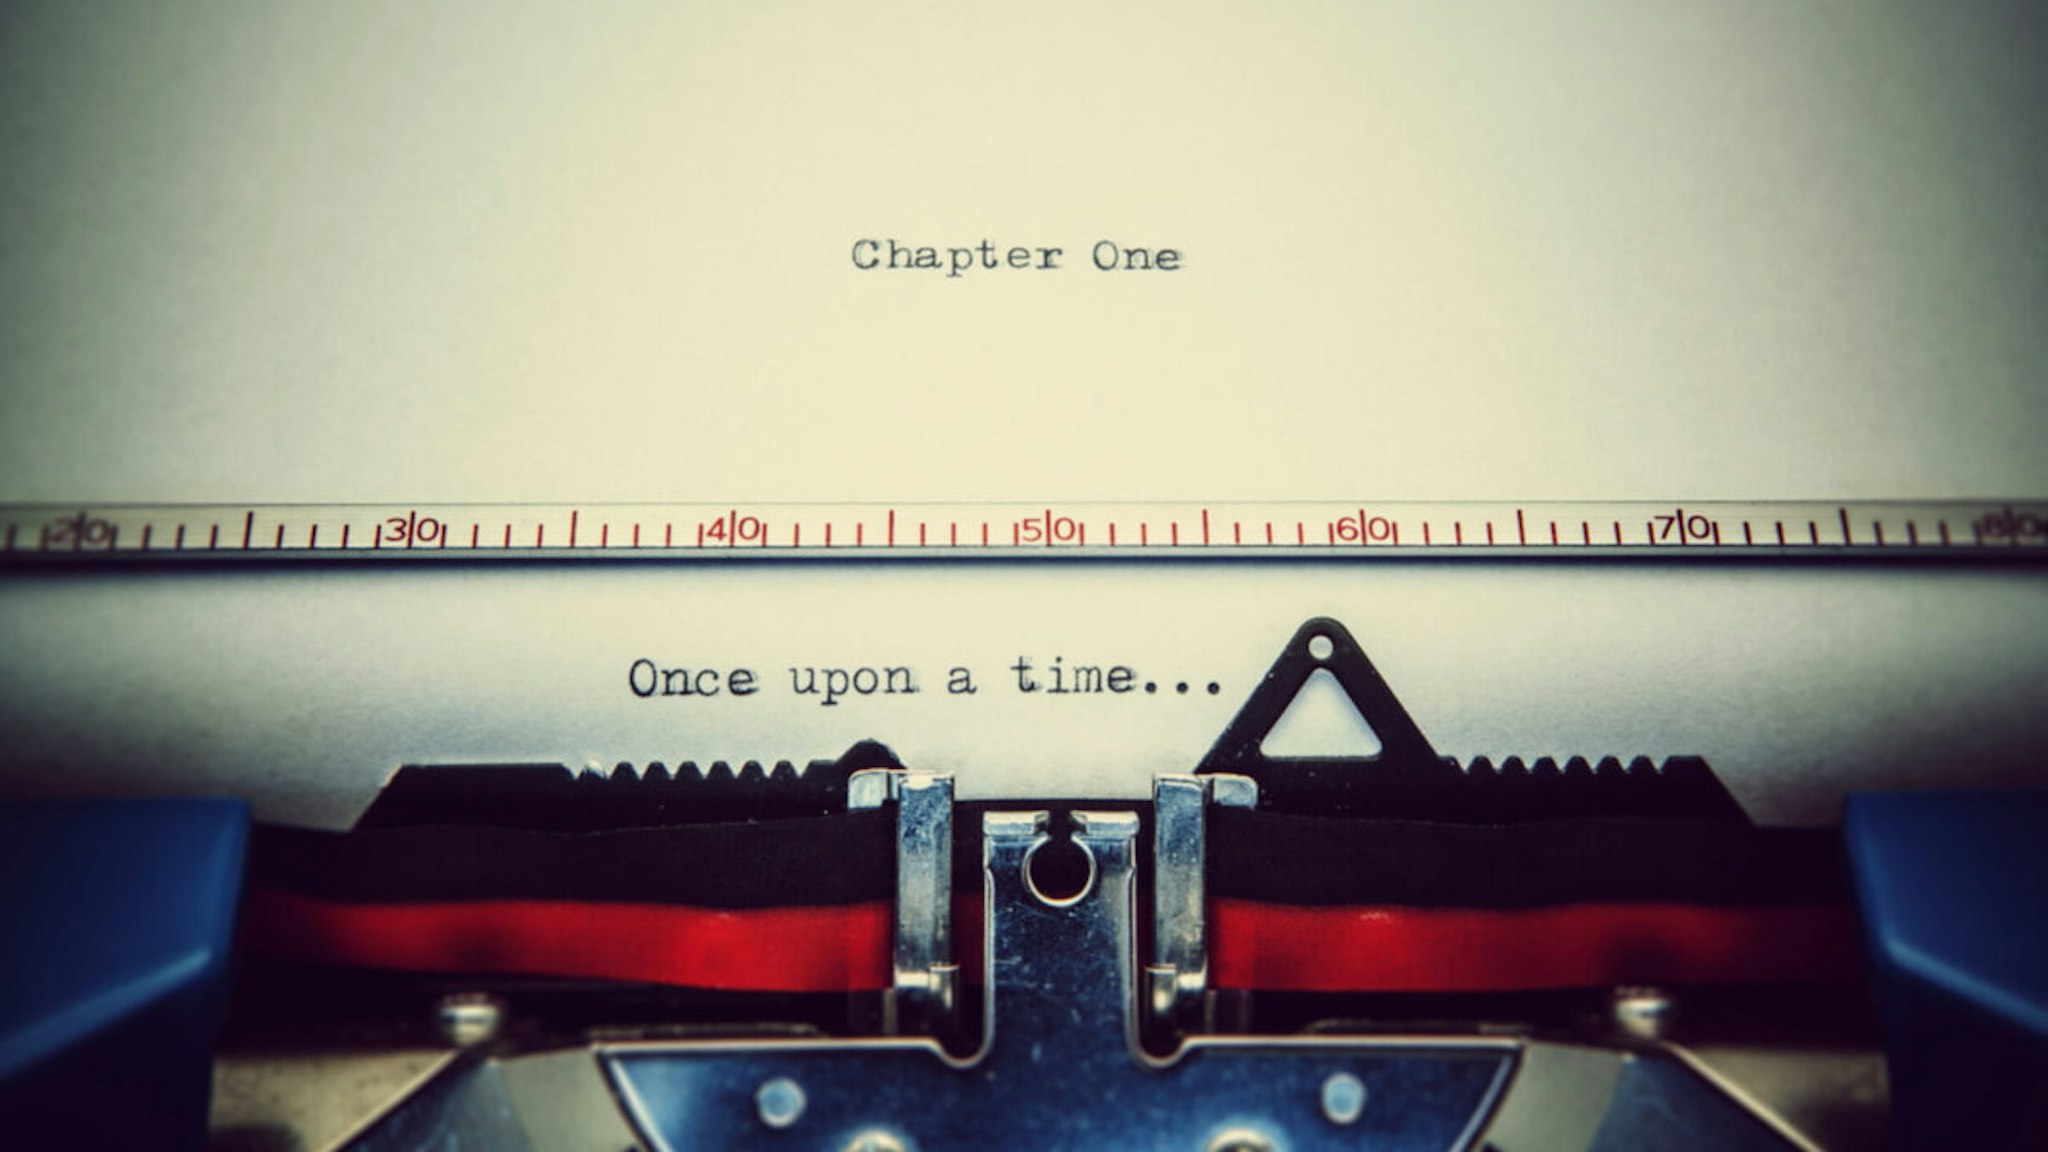 Once upon a time written on paper with typewriter.